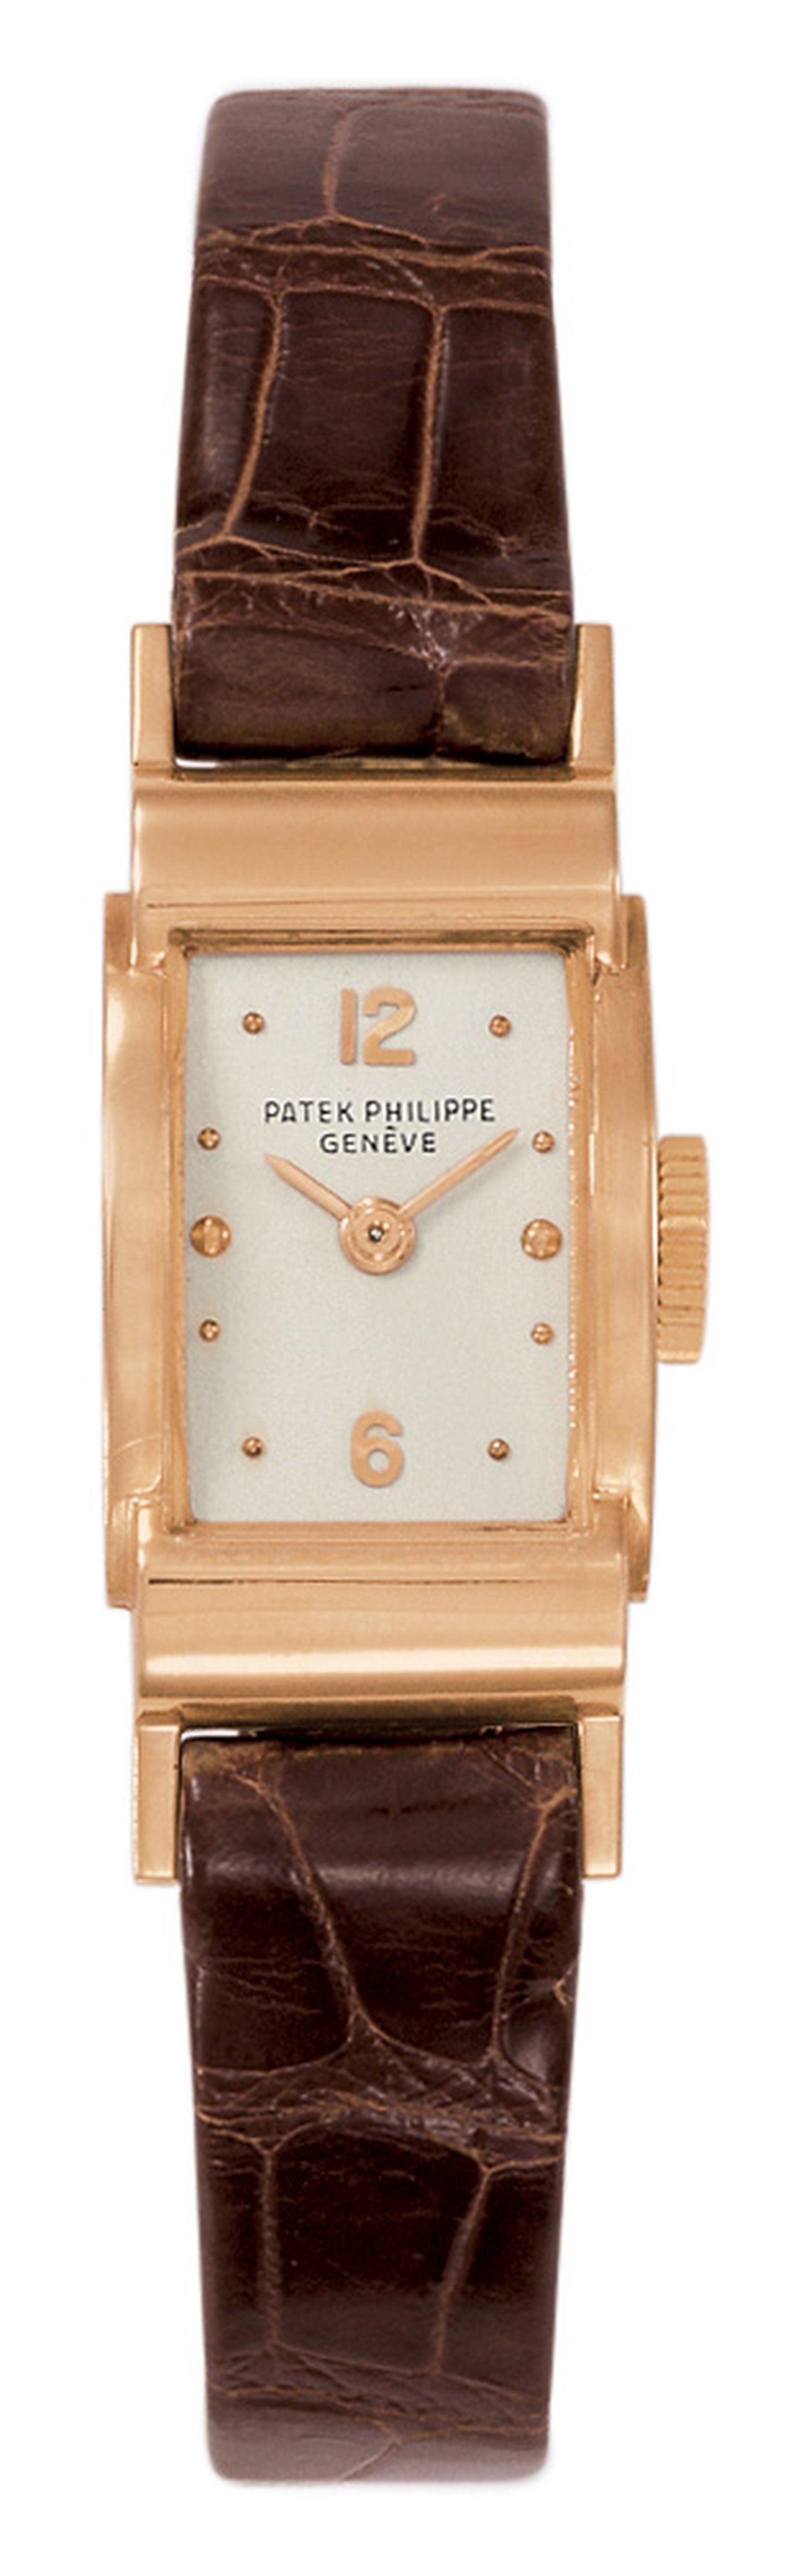 Patek-Philippe-P0530_a_100_collection-1940-60